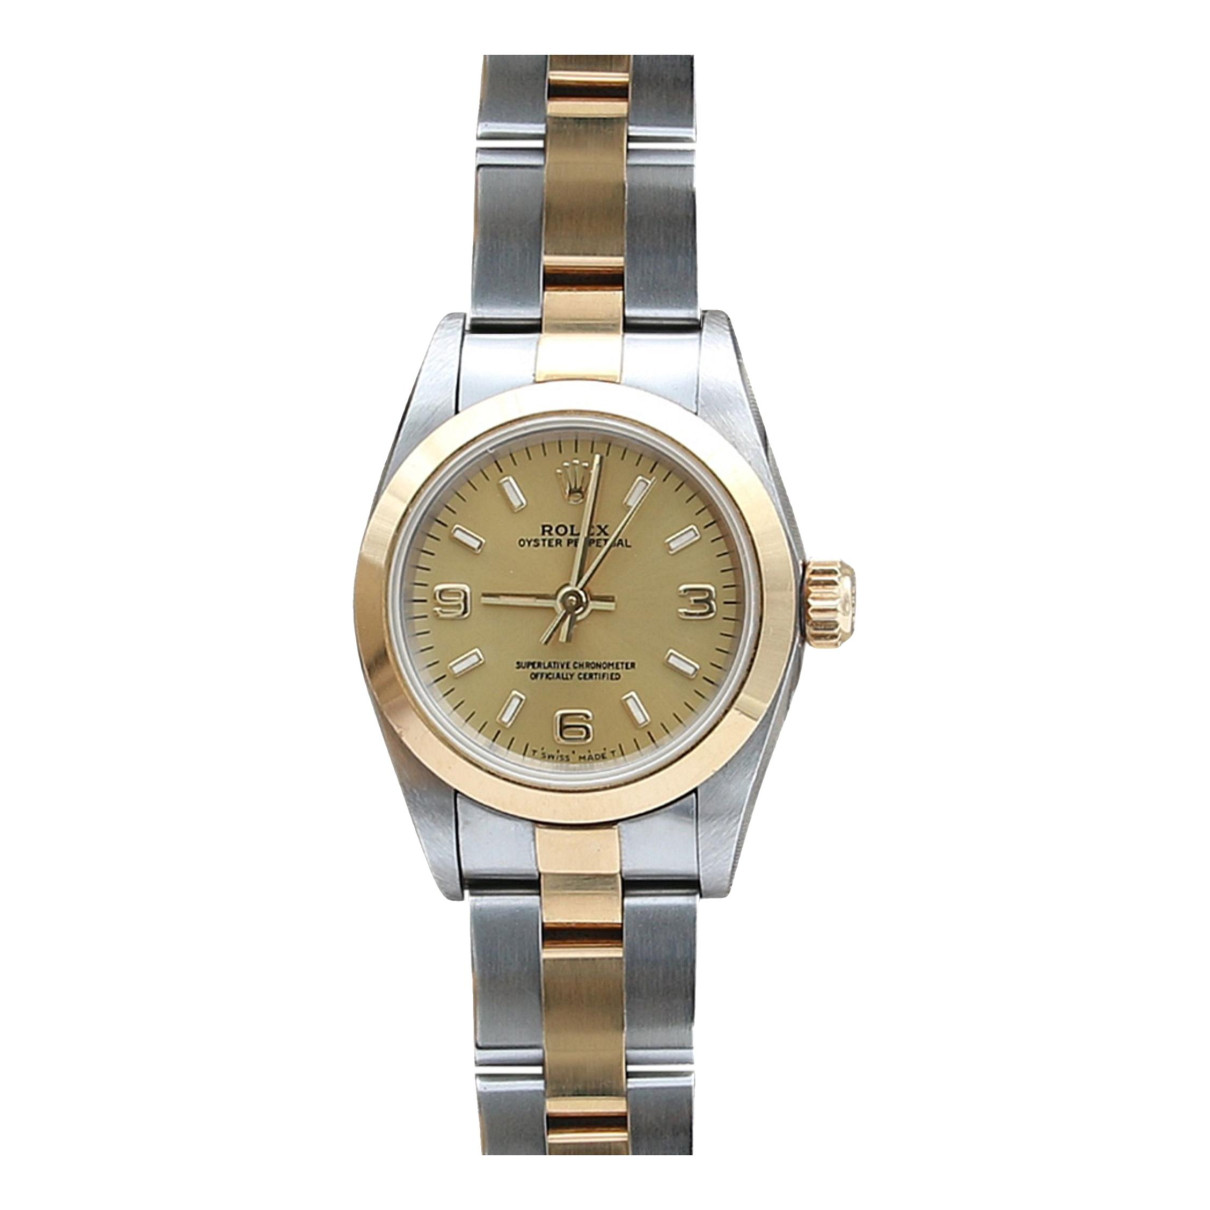 accessories Rolex watches Lady Oyster Perpetual 26mm for Female gold and steel. Used condition